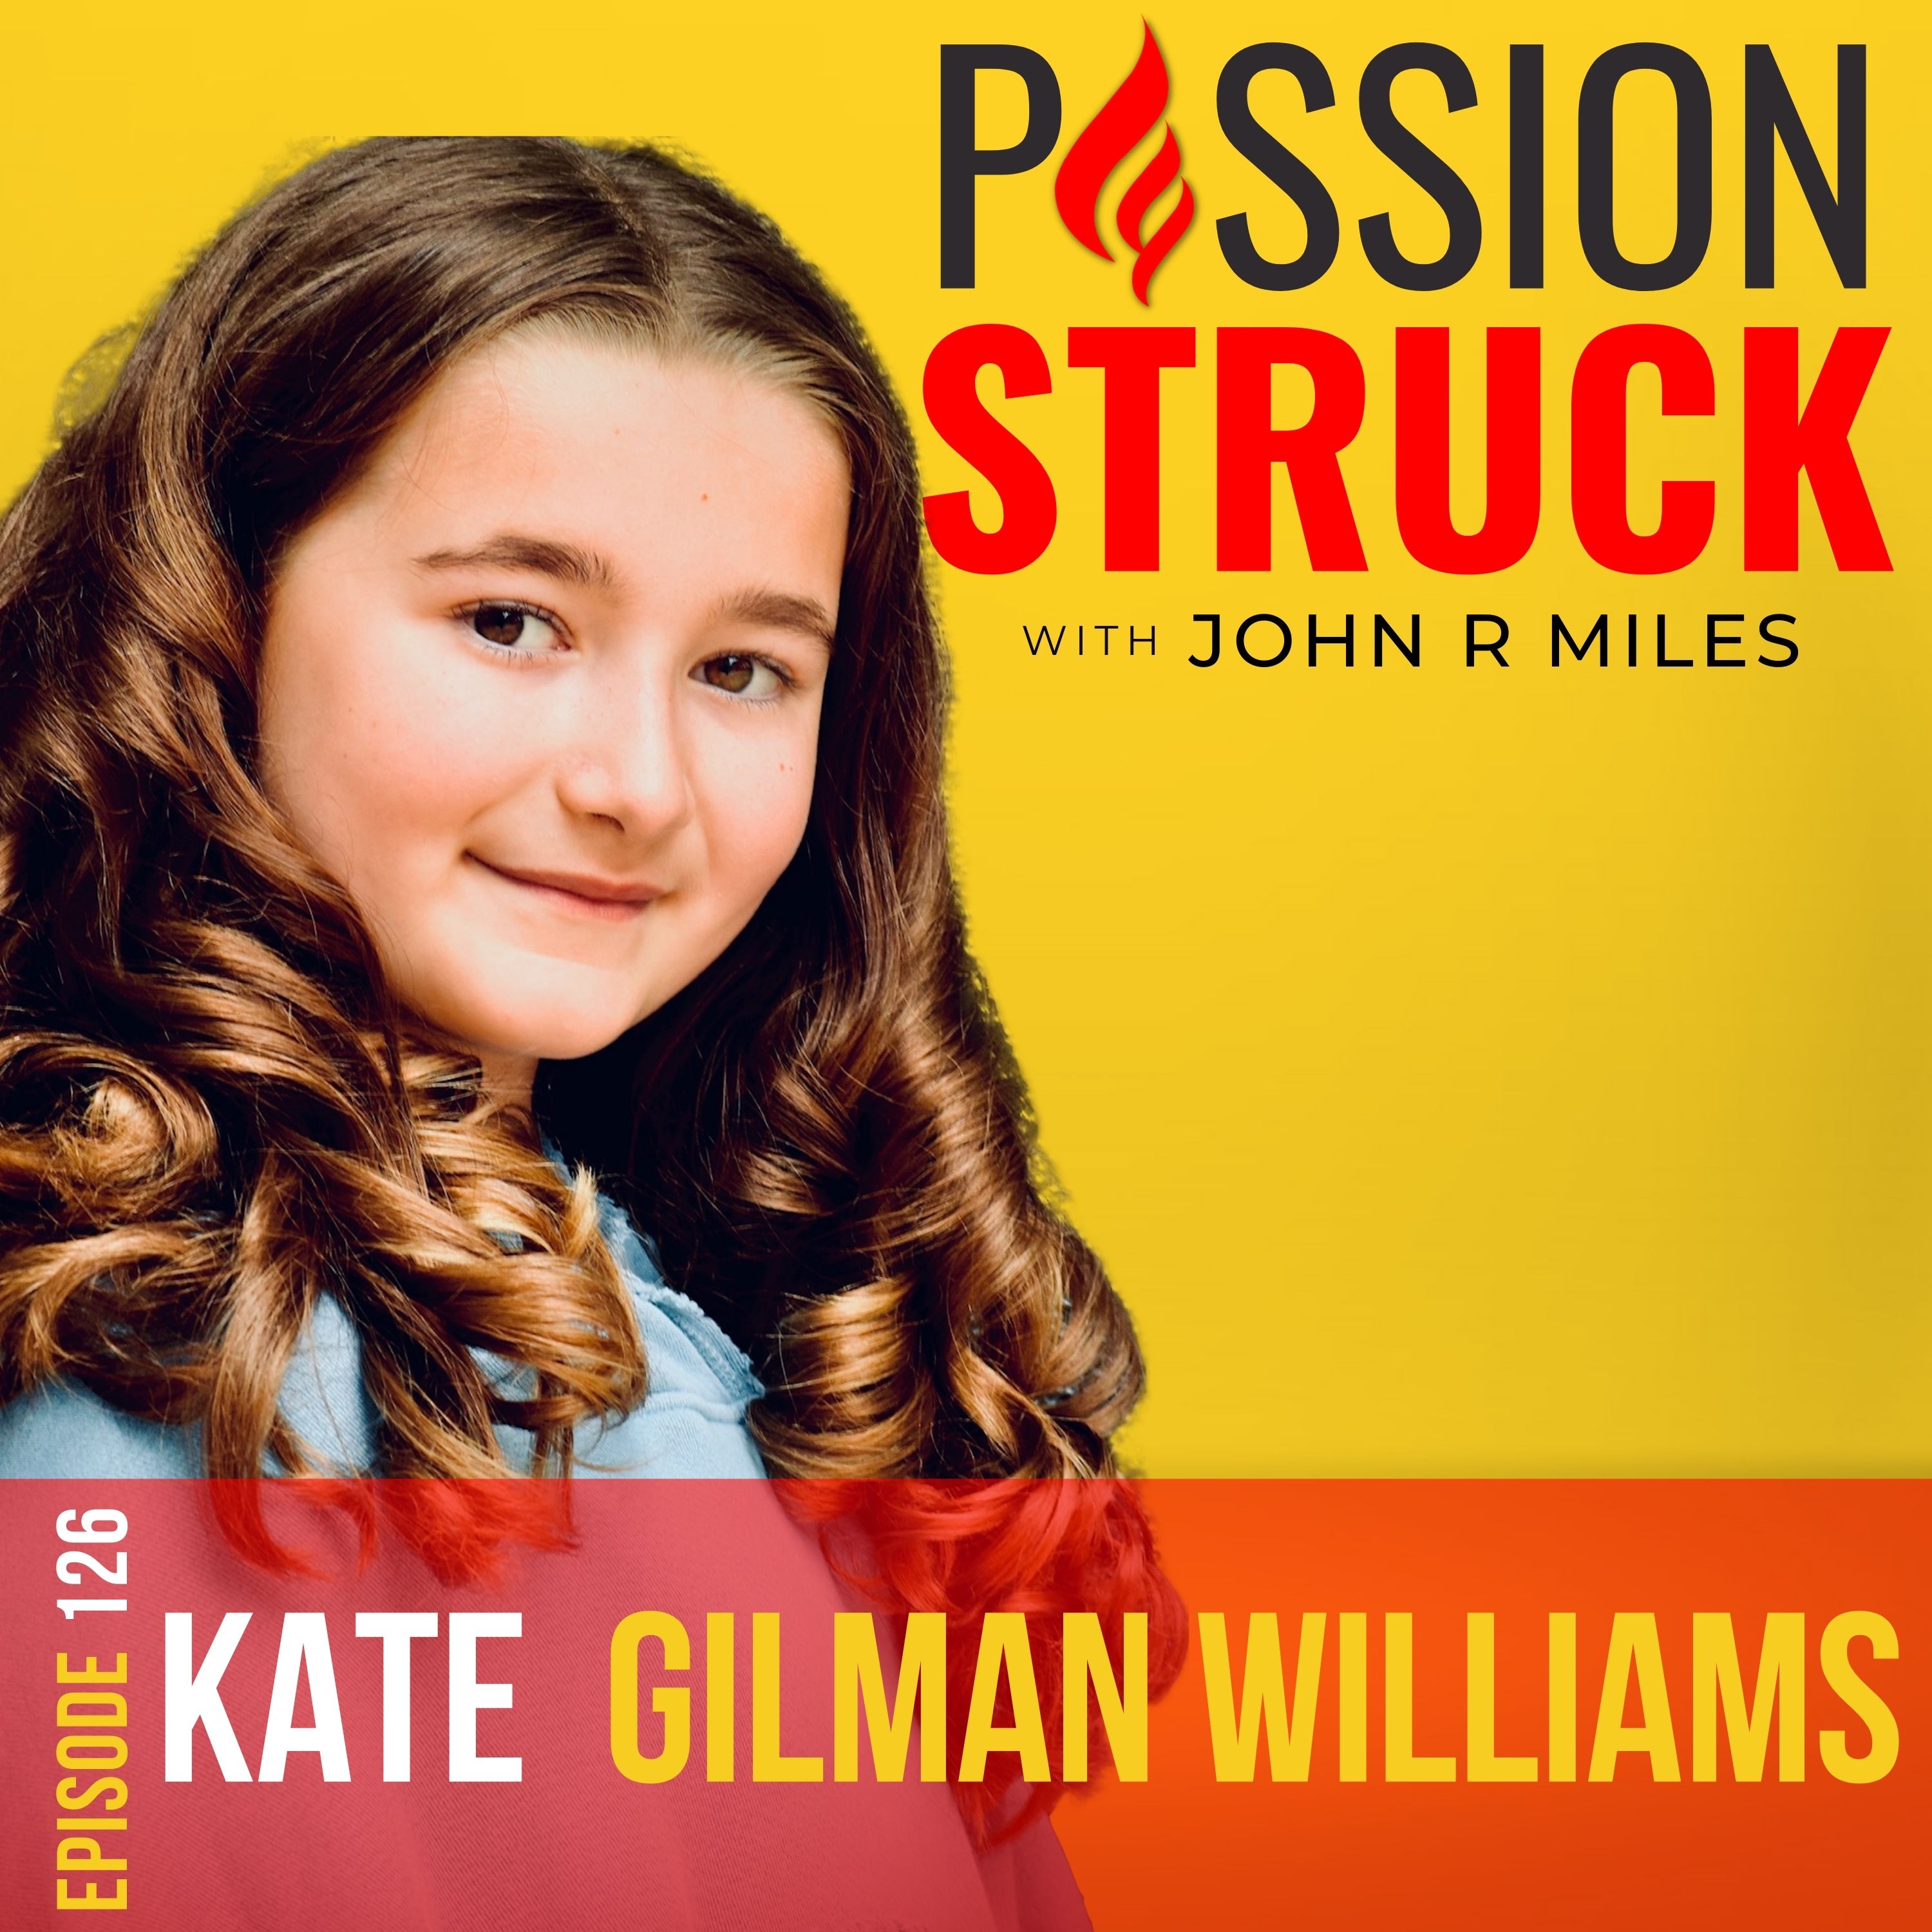 Passion Struck with John R. Miles Album Cover Episode 126 with Kate Gilman Williams